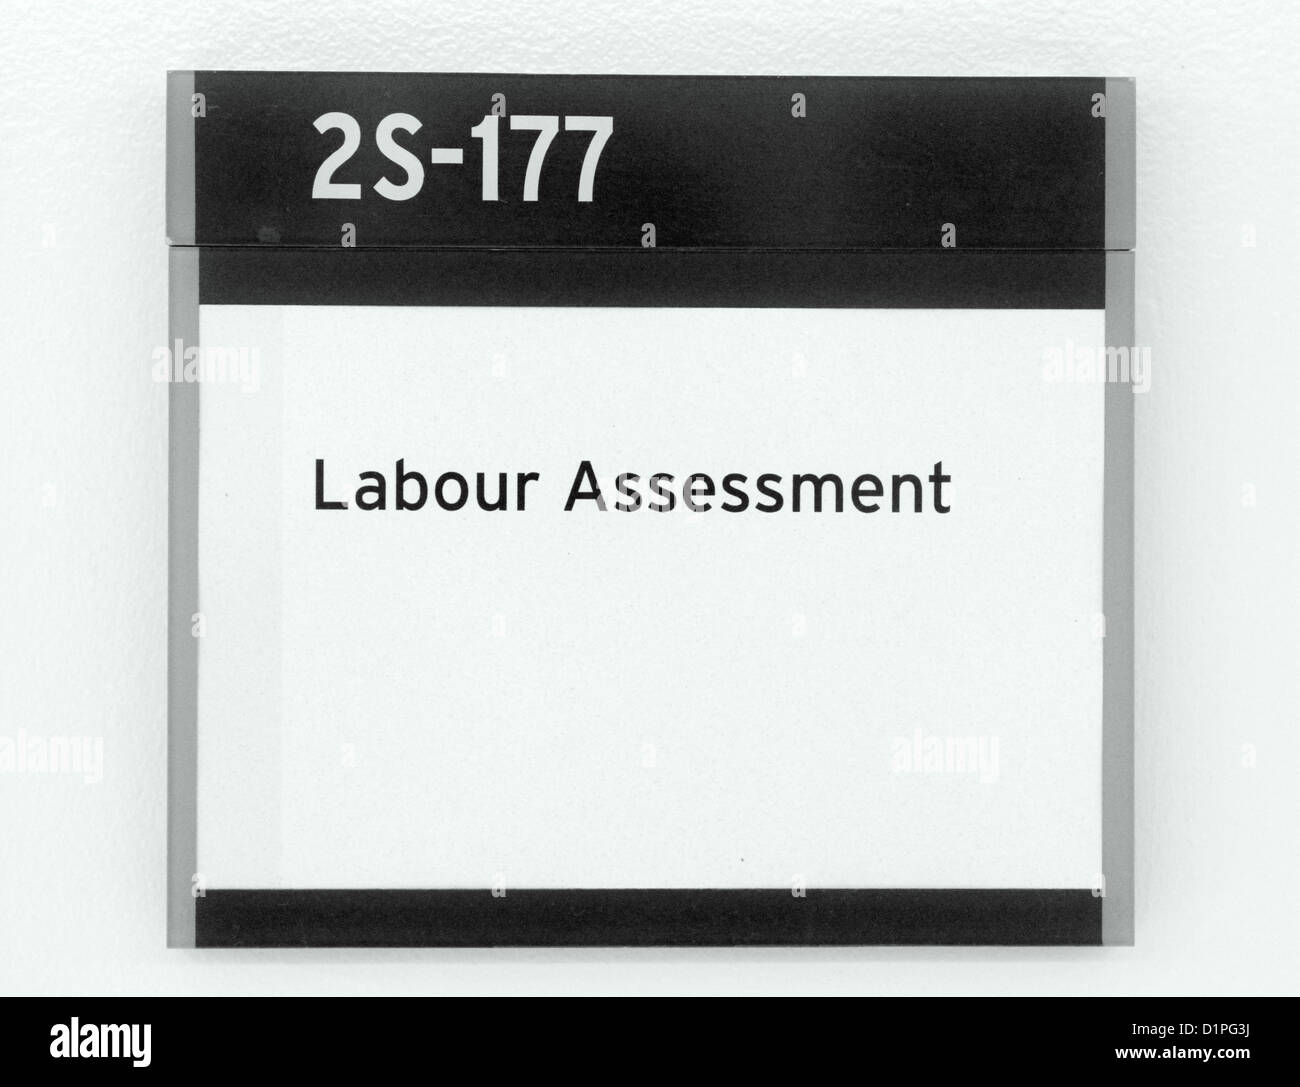 Labour Assessment Sign Stock Photo